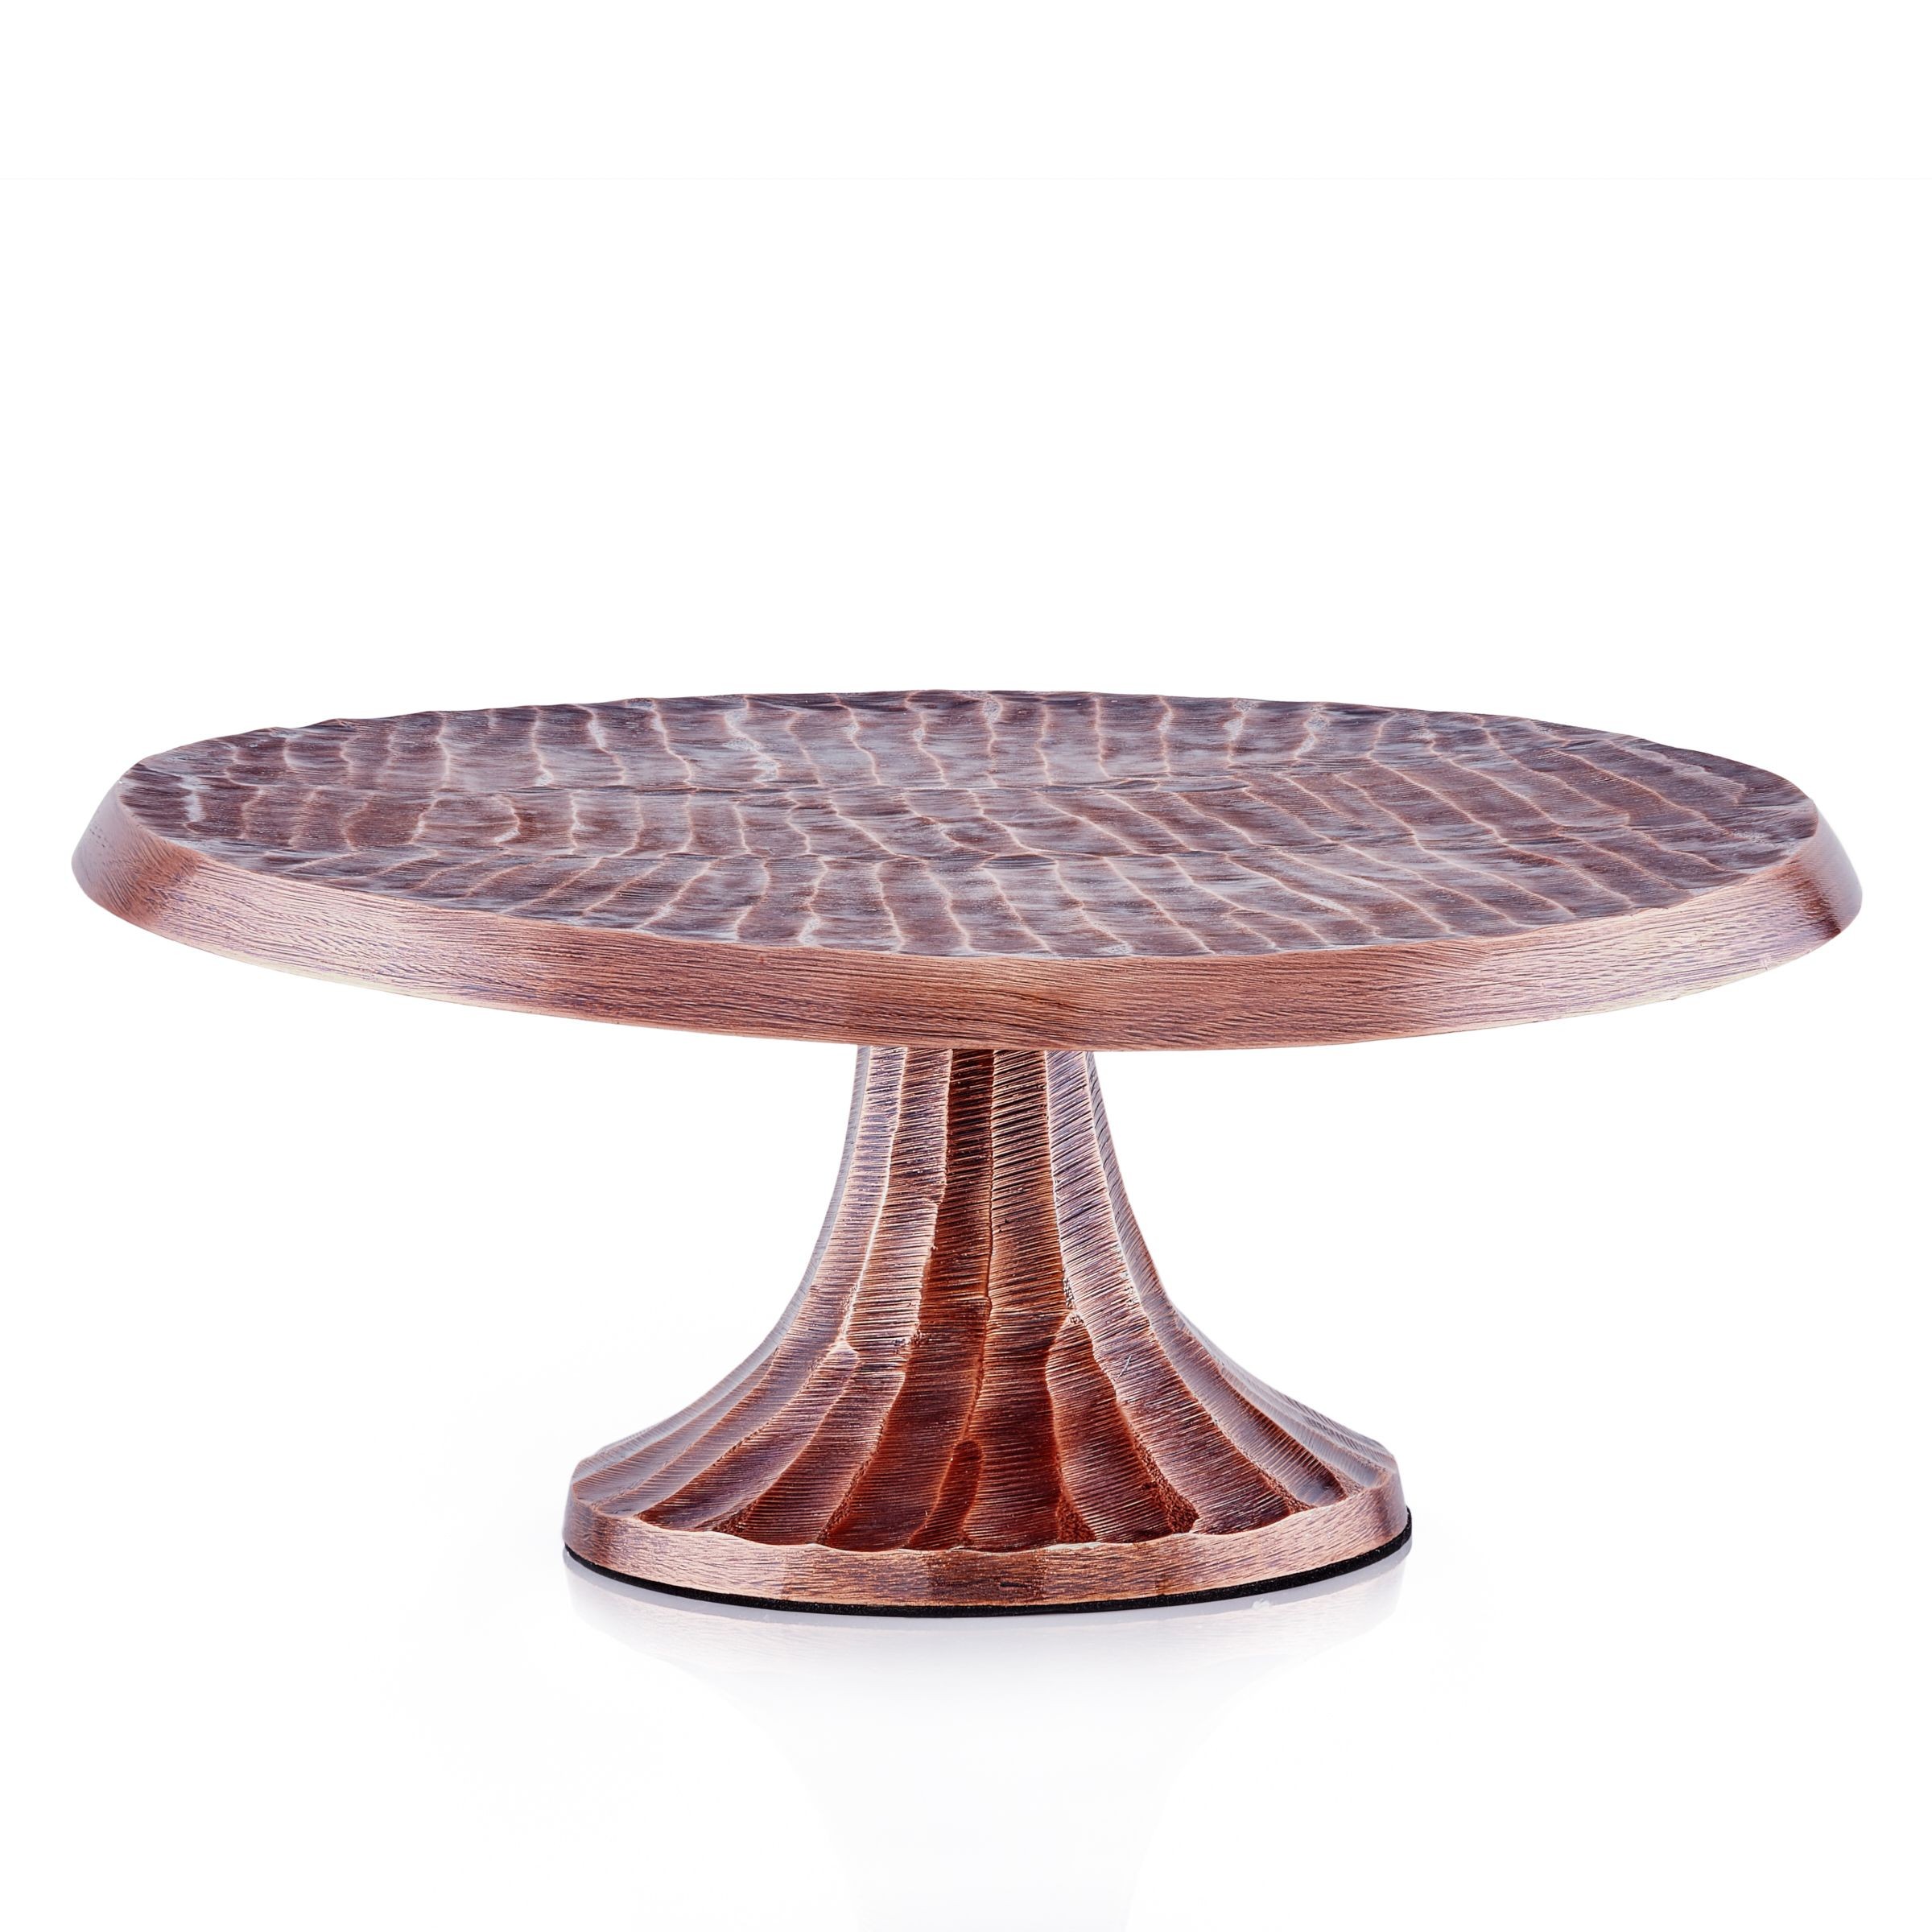 Old Dutch International A5125 Tribal Aluminum Cake Stand with Antique Copper Finish, 12 3/4" x 12 3/4" x 5 1/4"